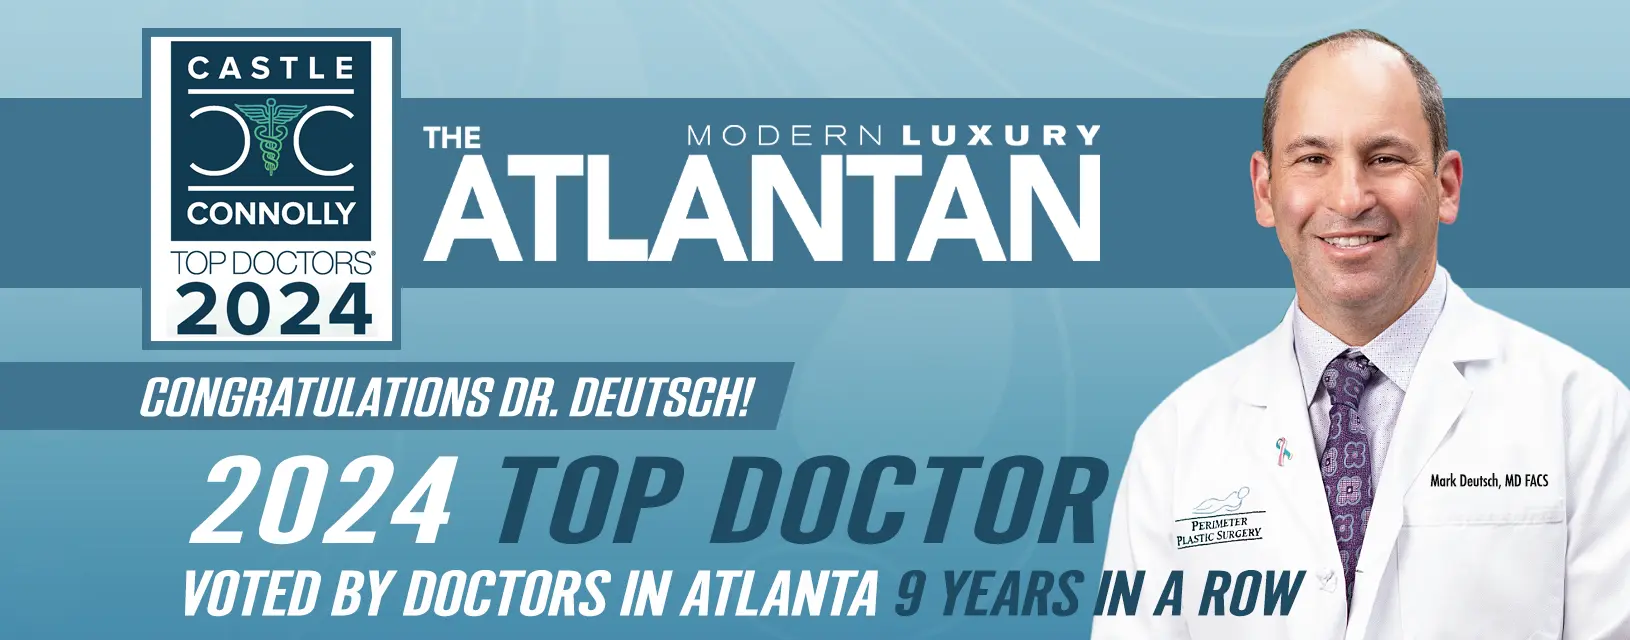 Voted Top Doc 2024 - 9 Years in a Row